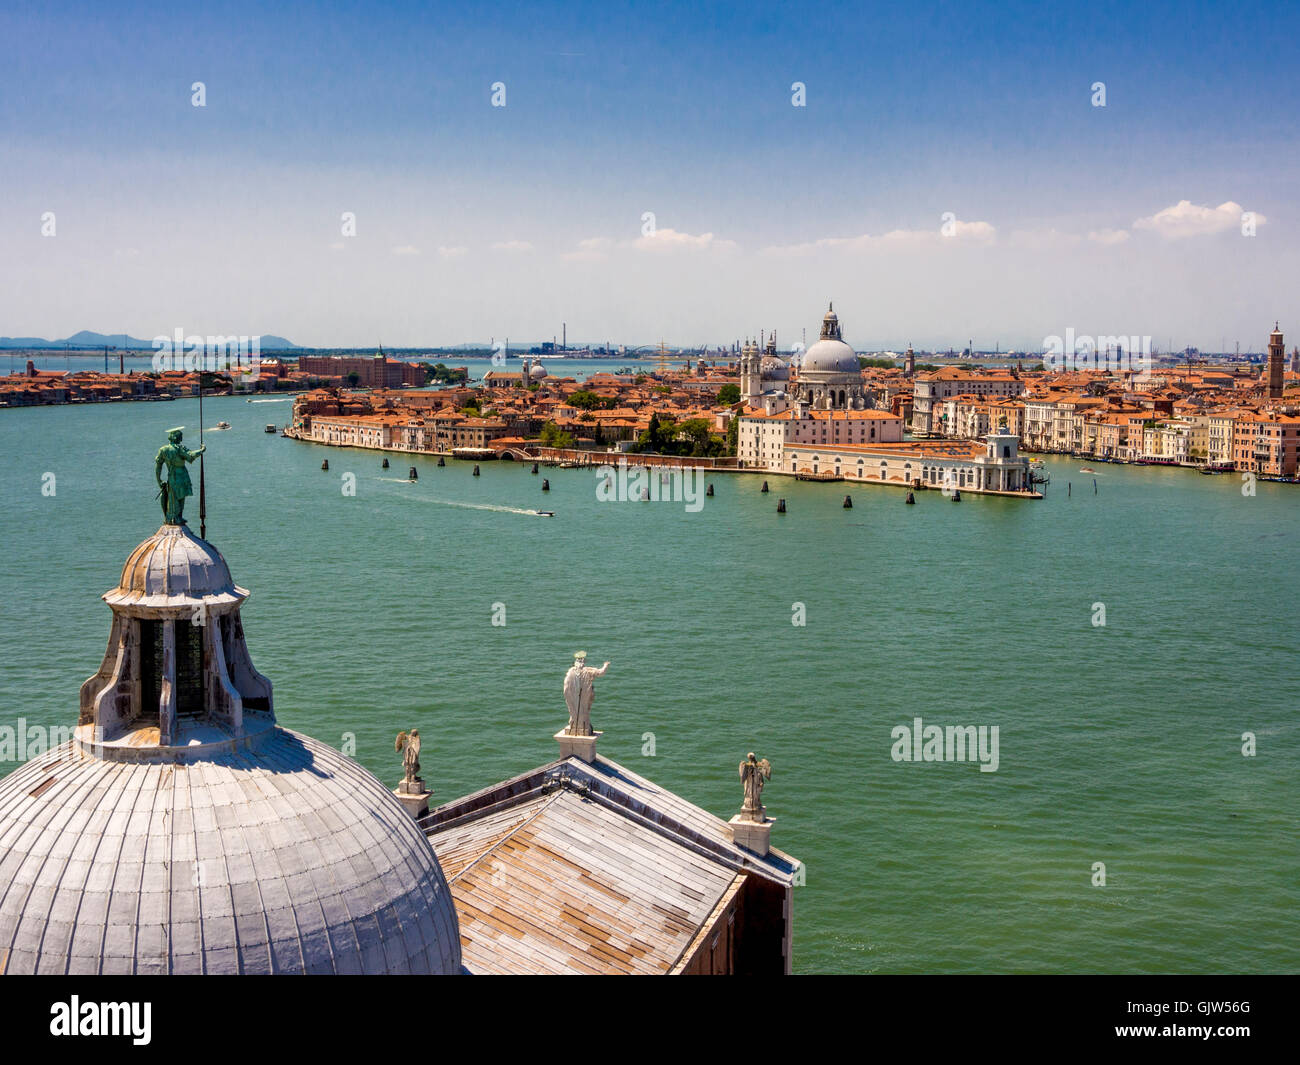 Aerial view of the dome and roof of San Giorgio Maggiore church with mainland Venice and the islan of Giudecca in the background Stock Photo